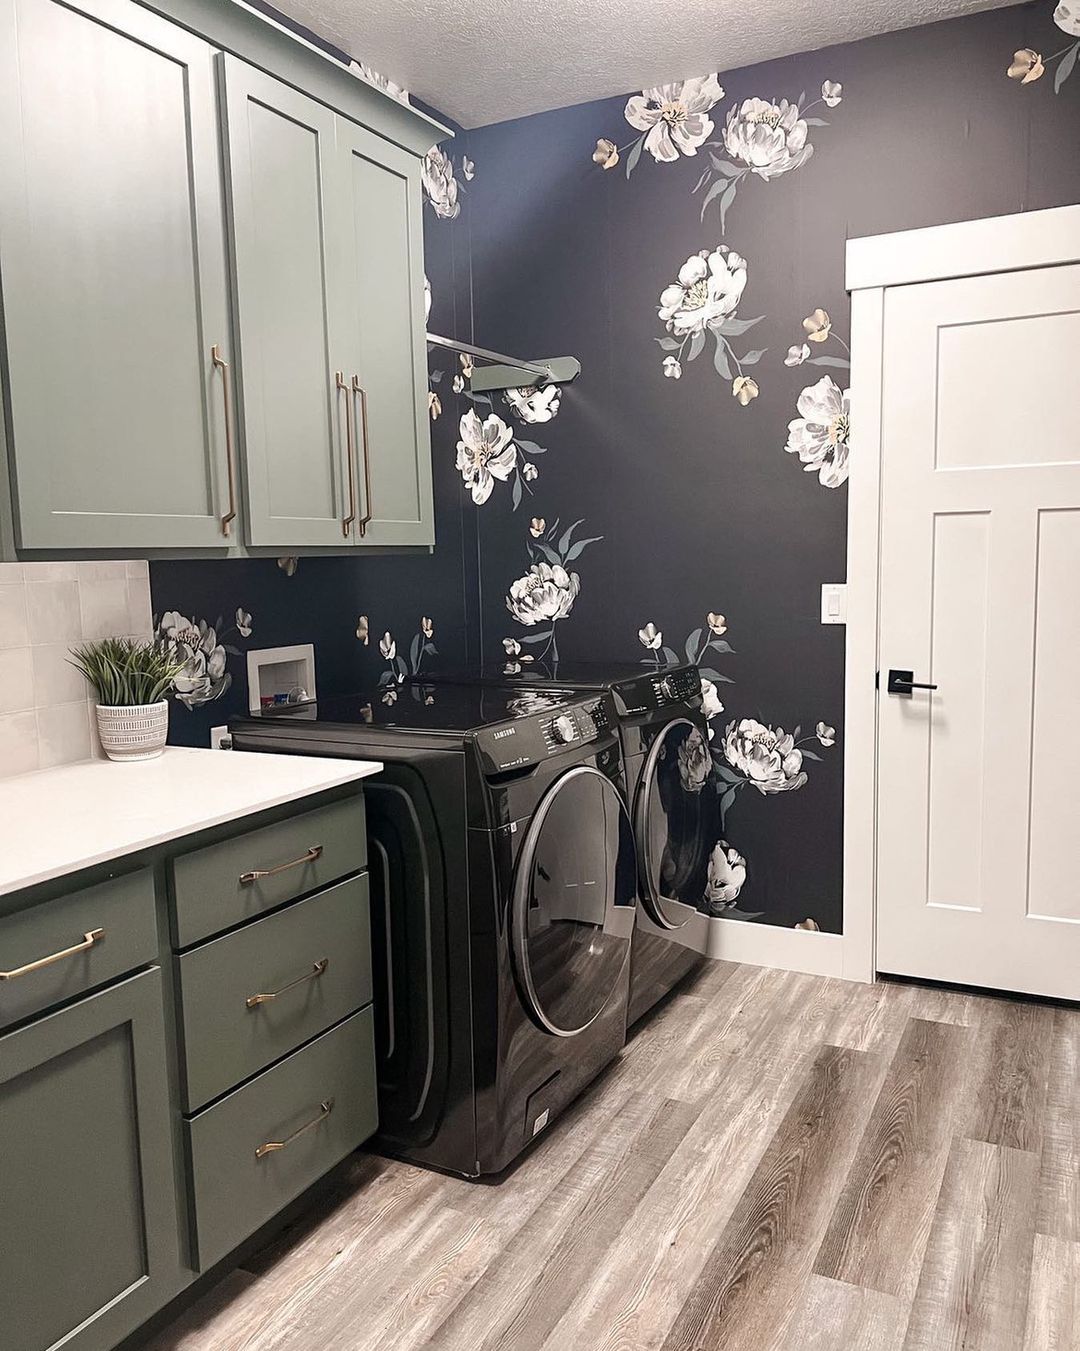 Floral Elegance in a Dark Laundry Room